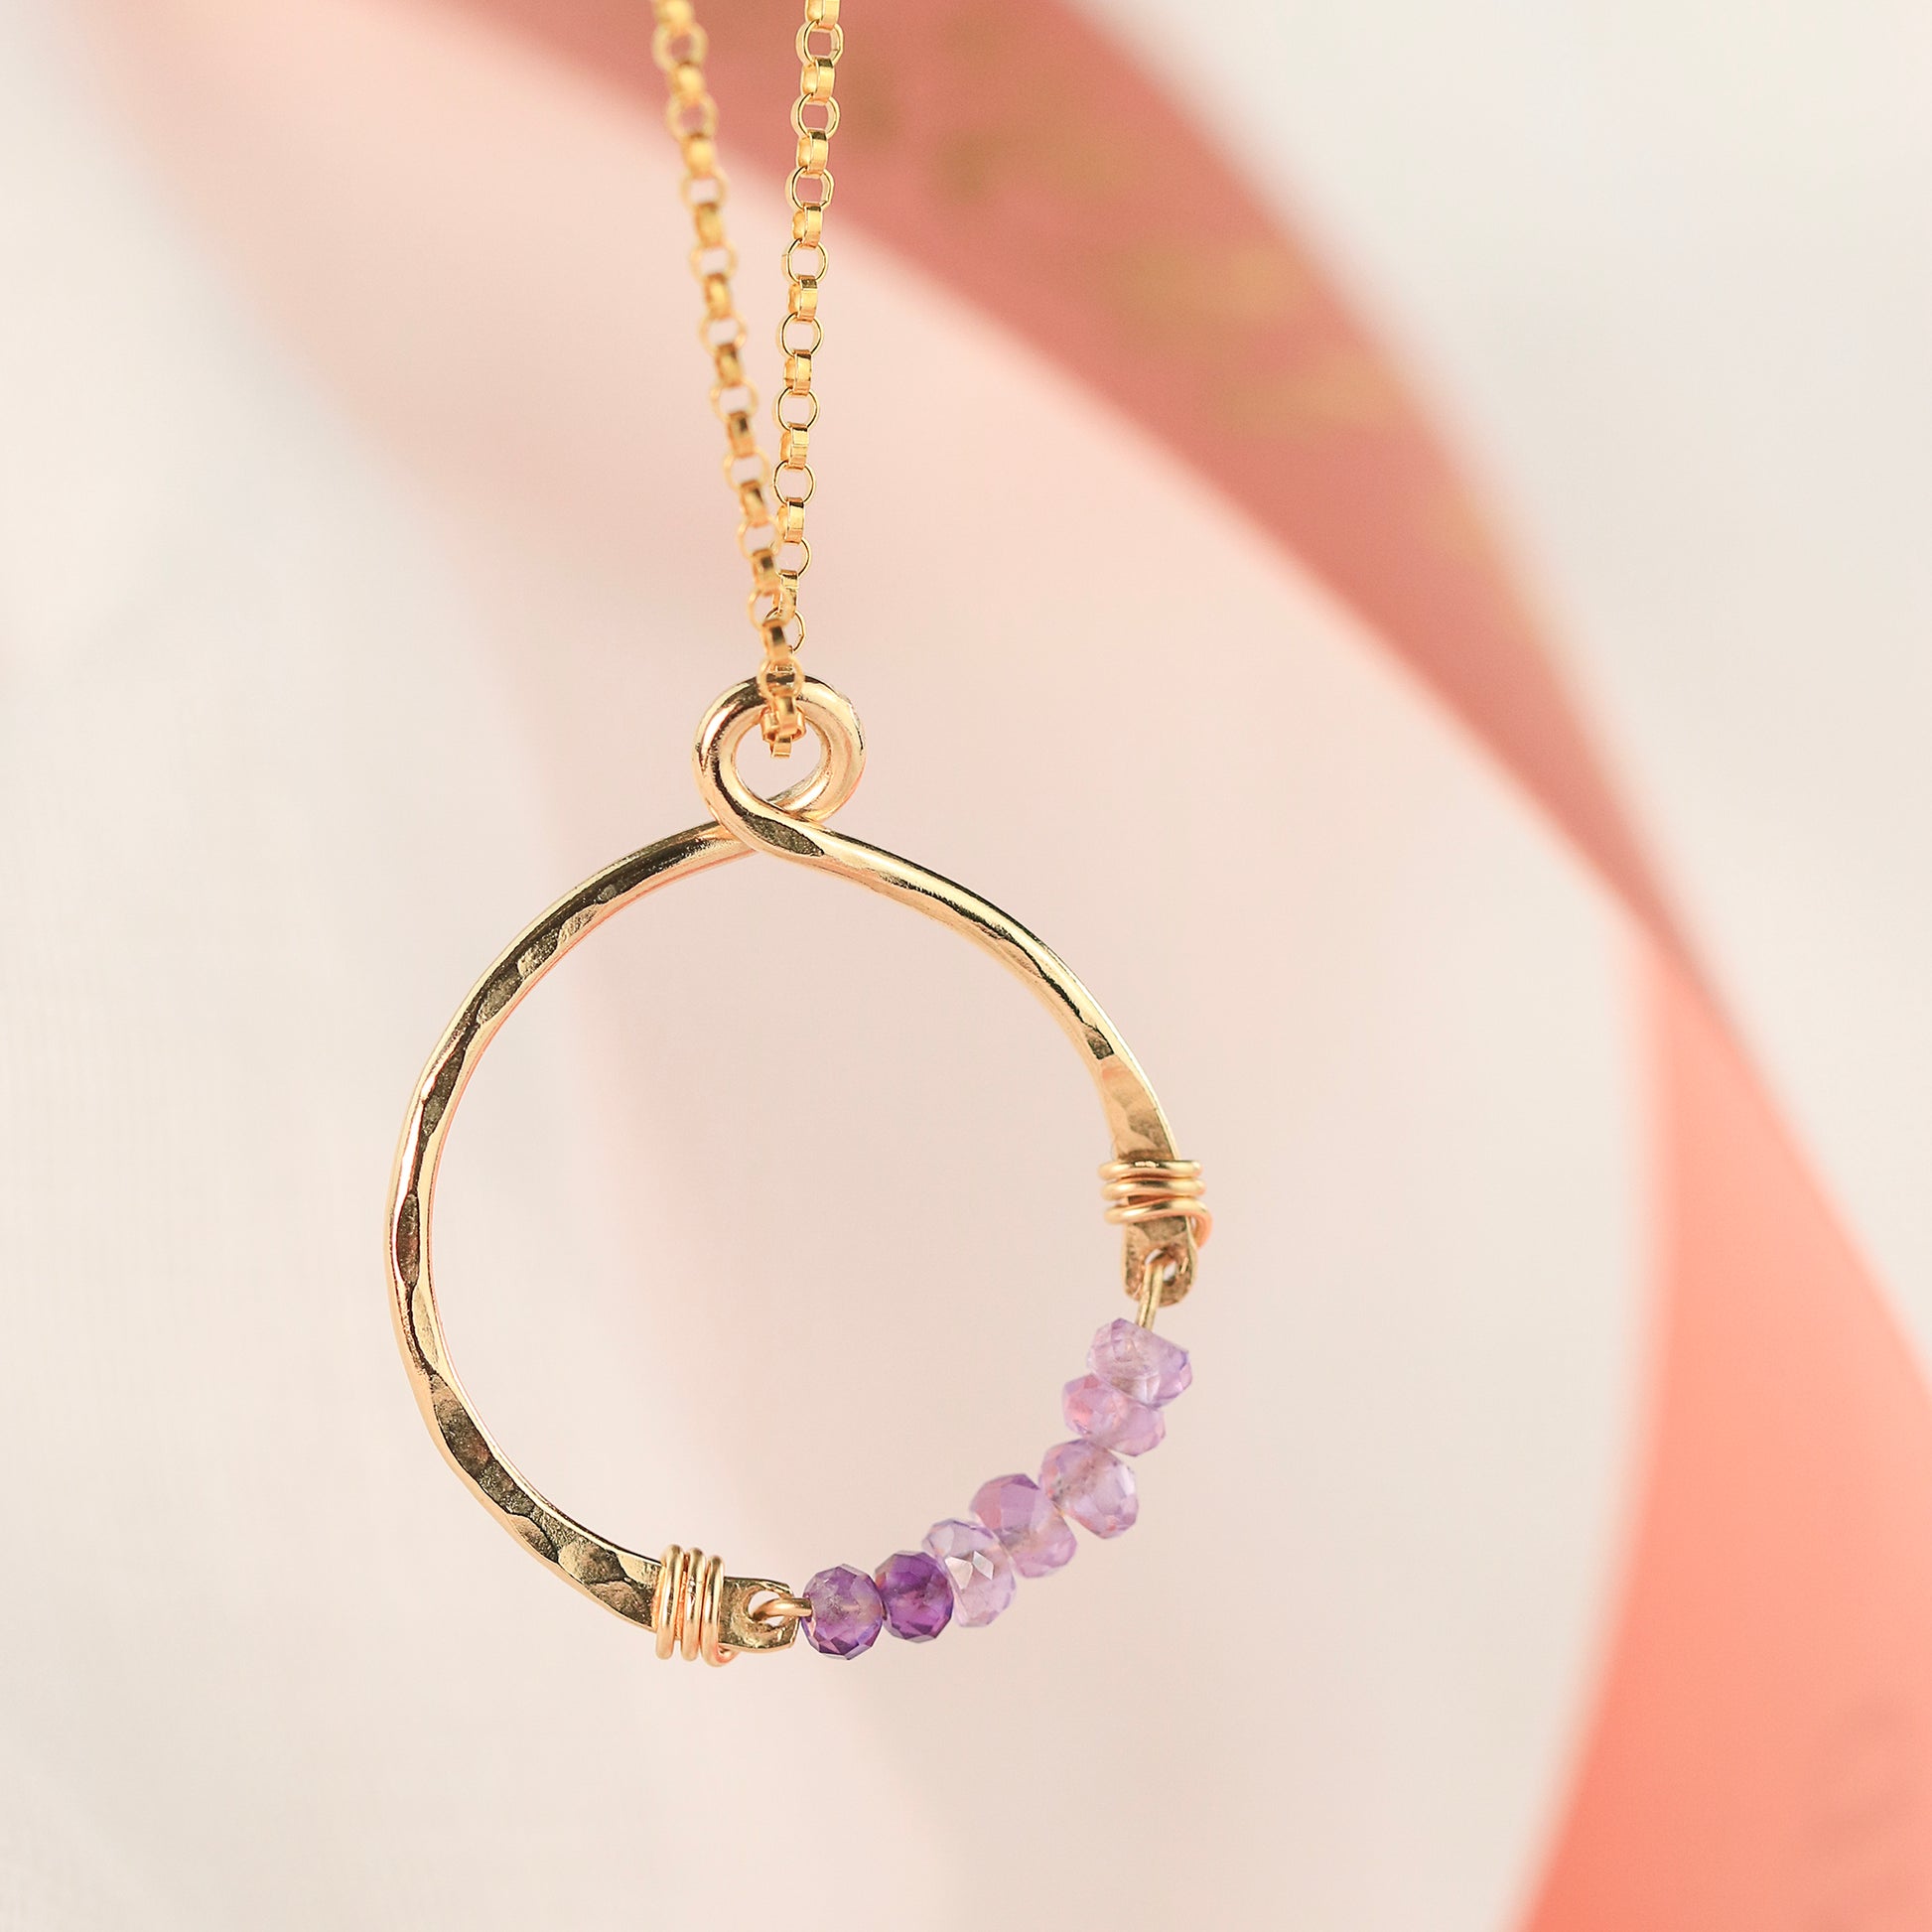 Gift for Mum - Infinity Birthstone Necklace - Silver & Gold